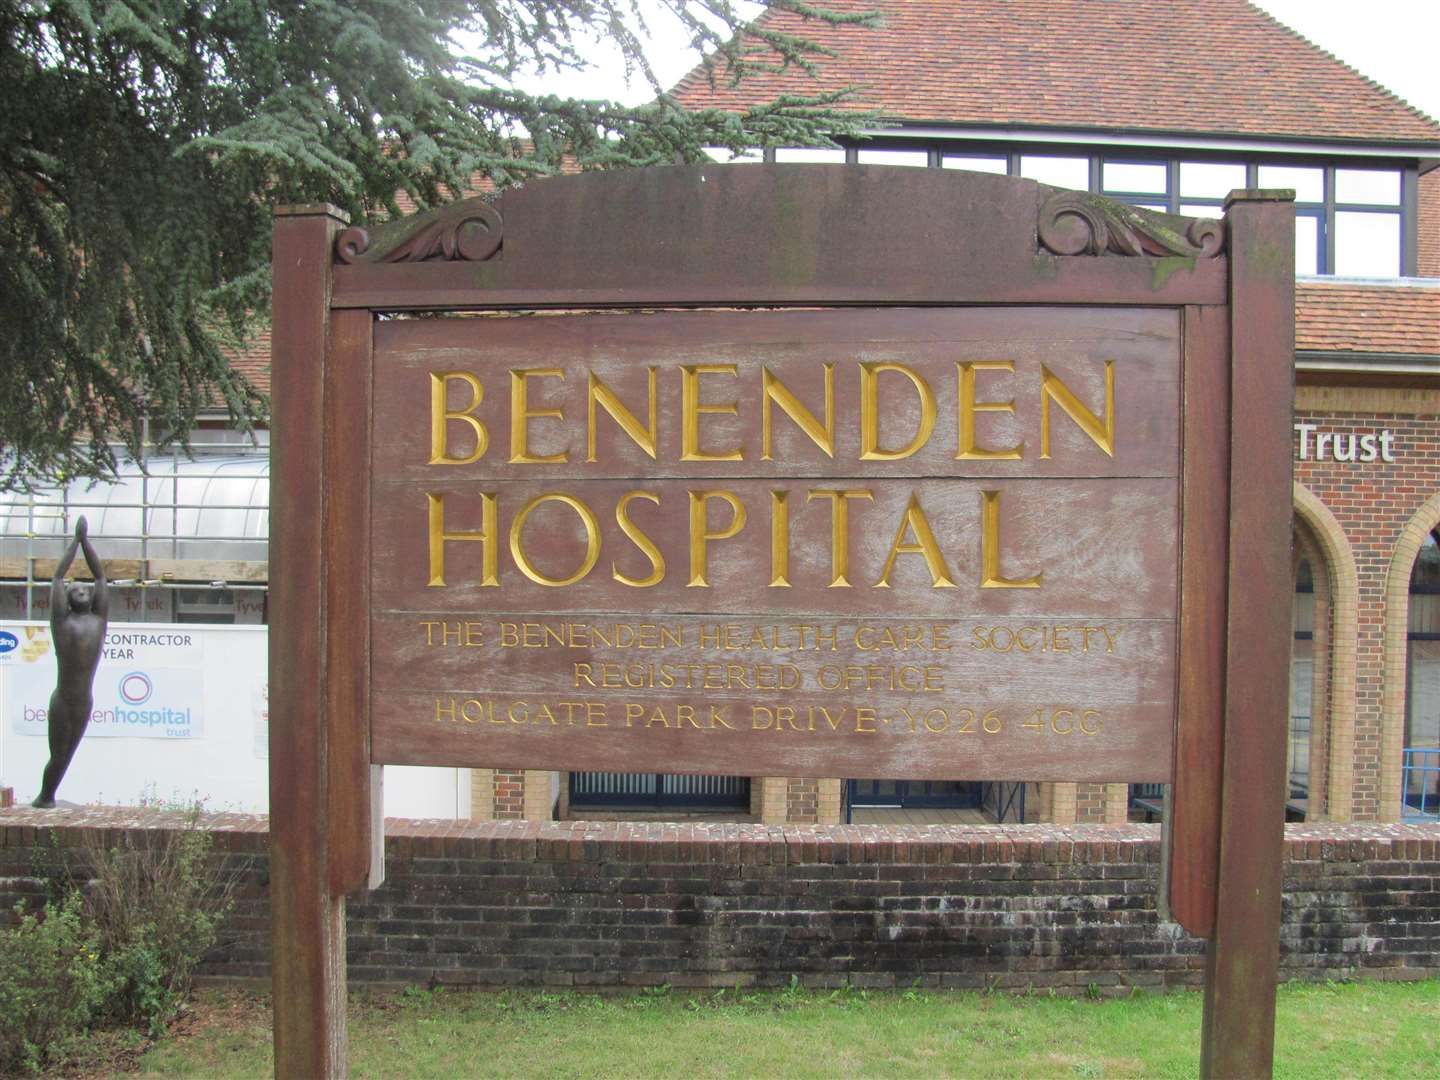 Benenden hospital has an outstanding record for hospital-acquired diseases